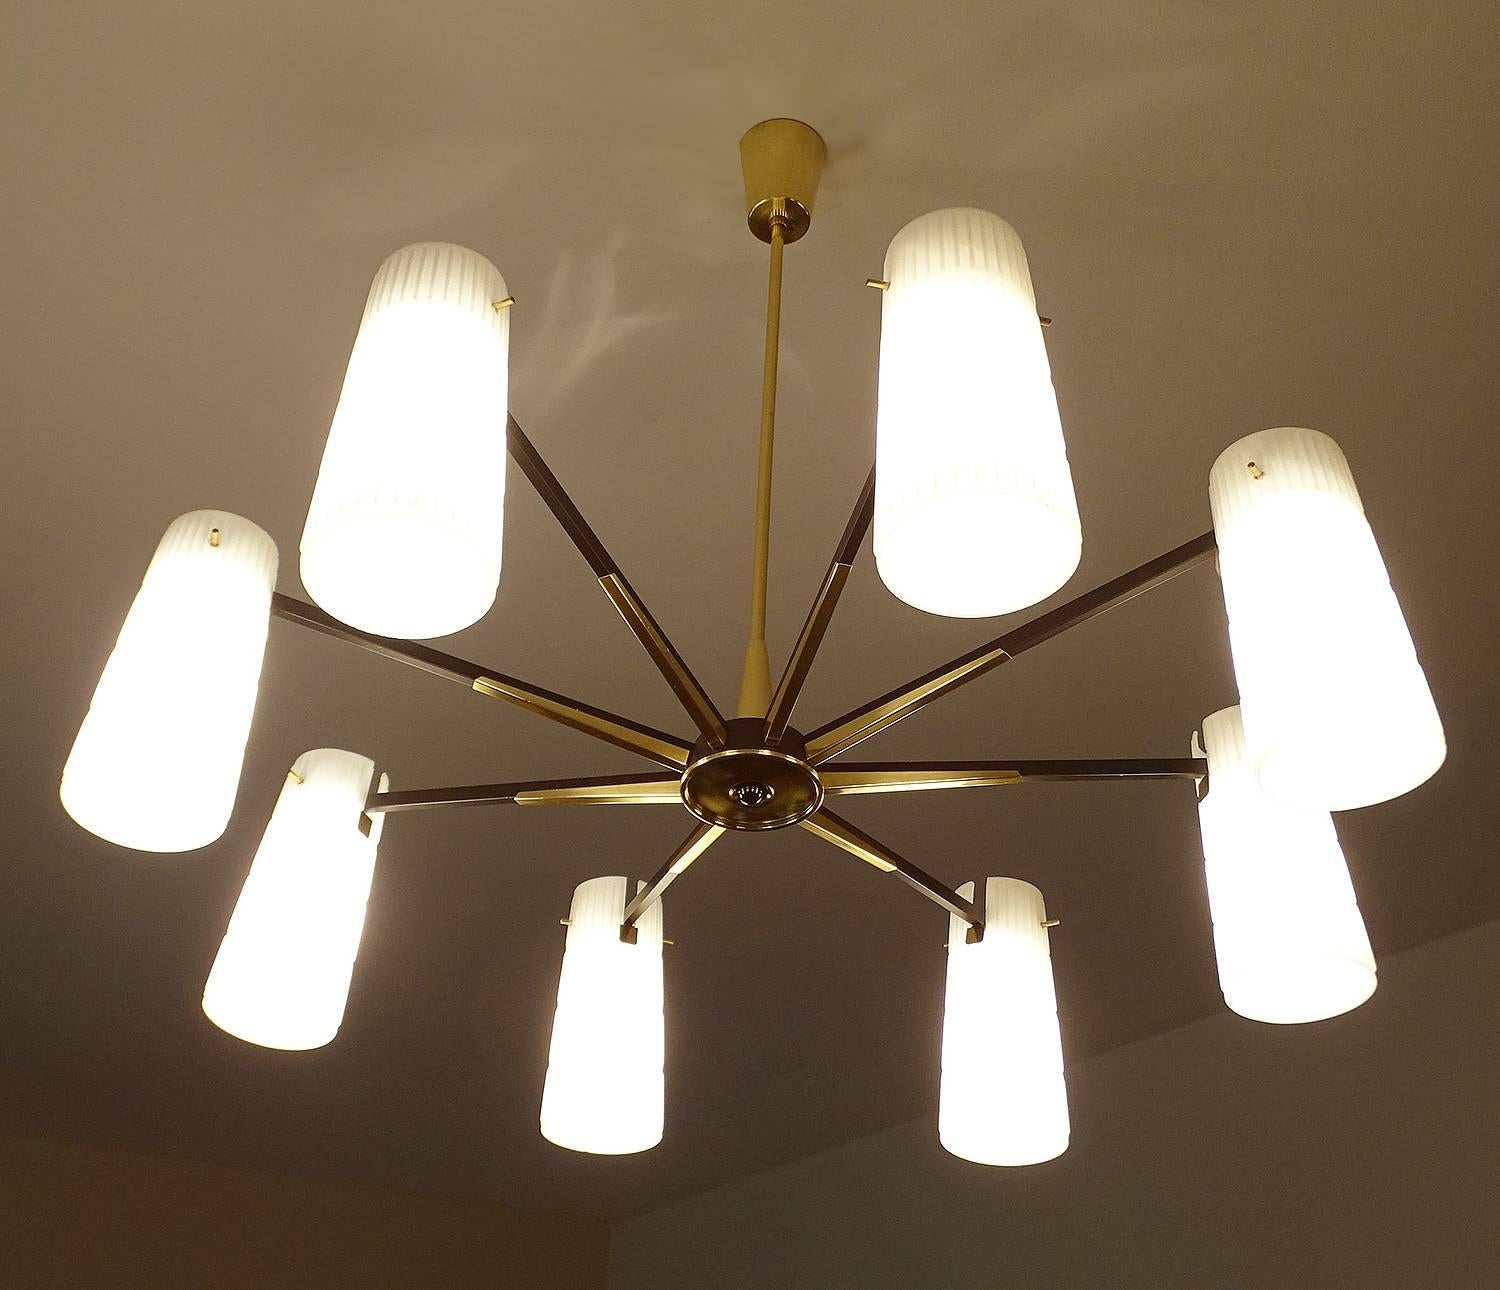 Large sunburst  chandelier, 1950s in a style reminiscent of Stilnovo and Arredoluce.  Satinated black structure with brass trims and central pod emulating a sunburst design, The diffusers are made from corrugated opaline glass 
29.53 in. / 75 cm